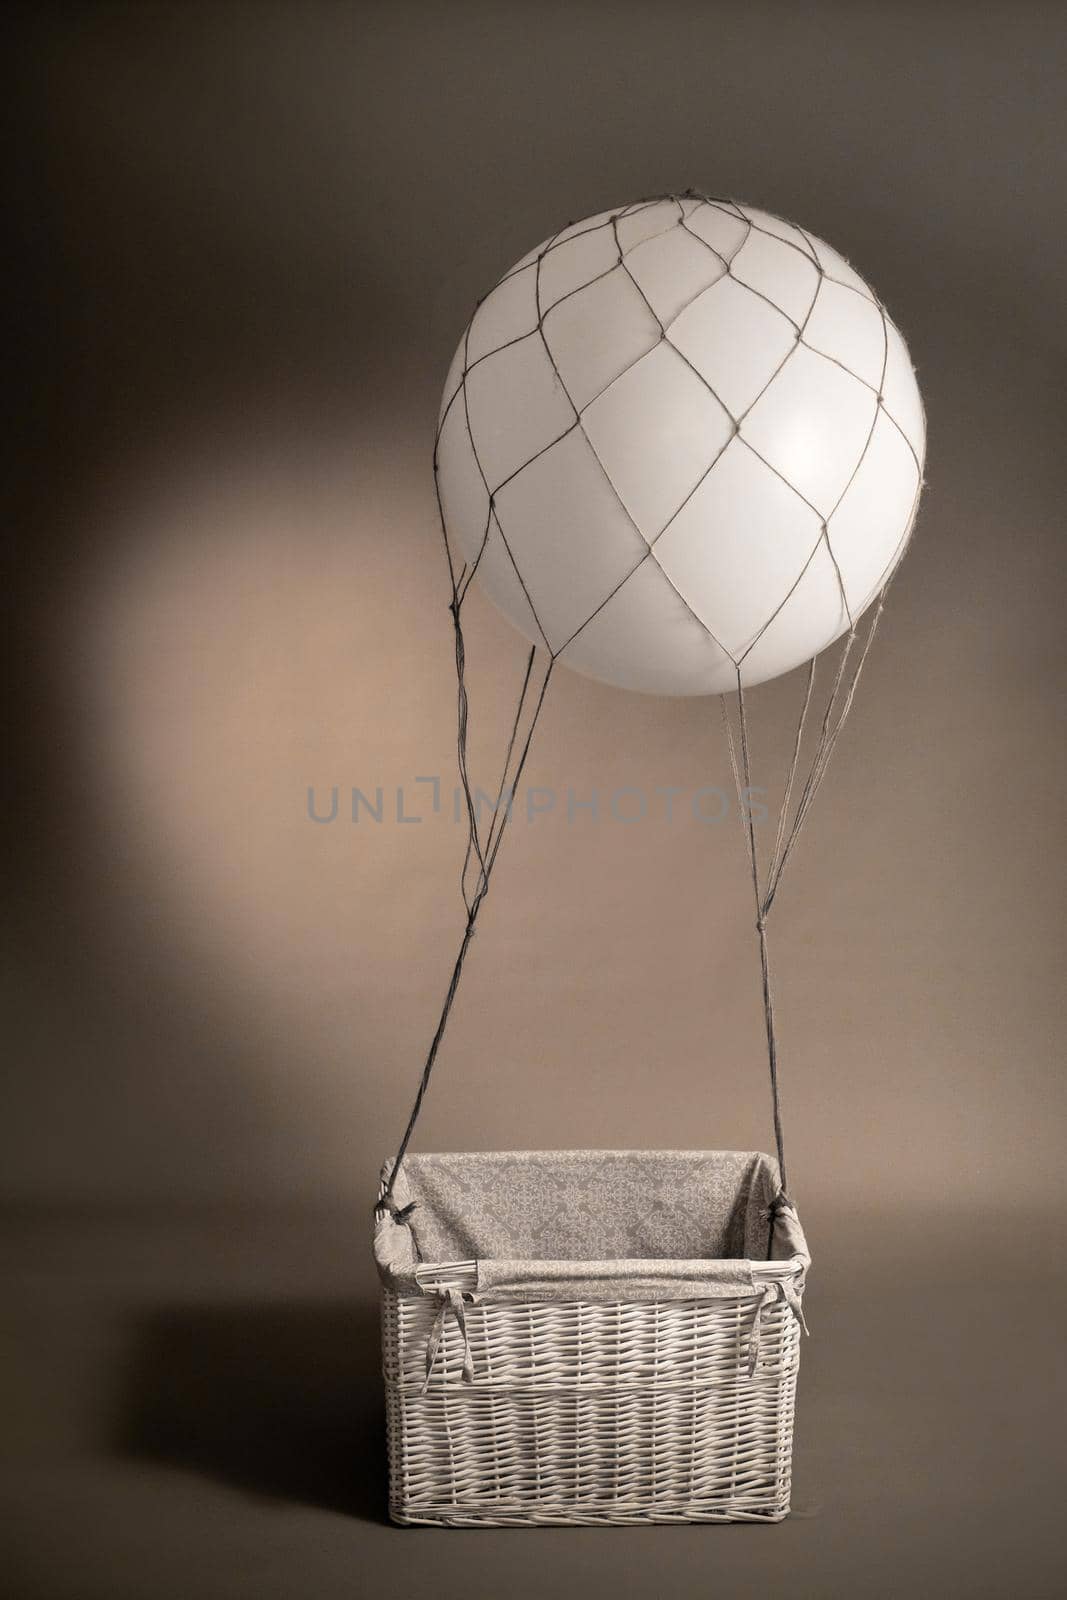 Balloon pilot for flying toy on gray background.